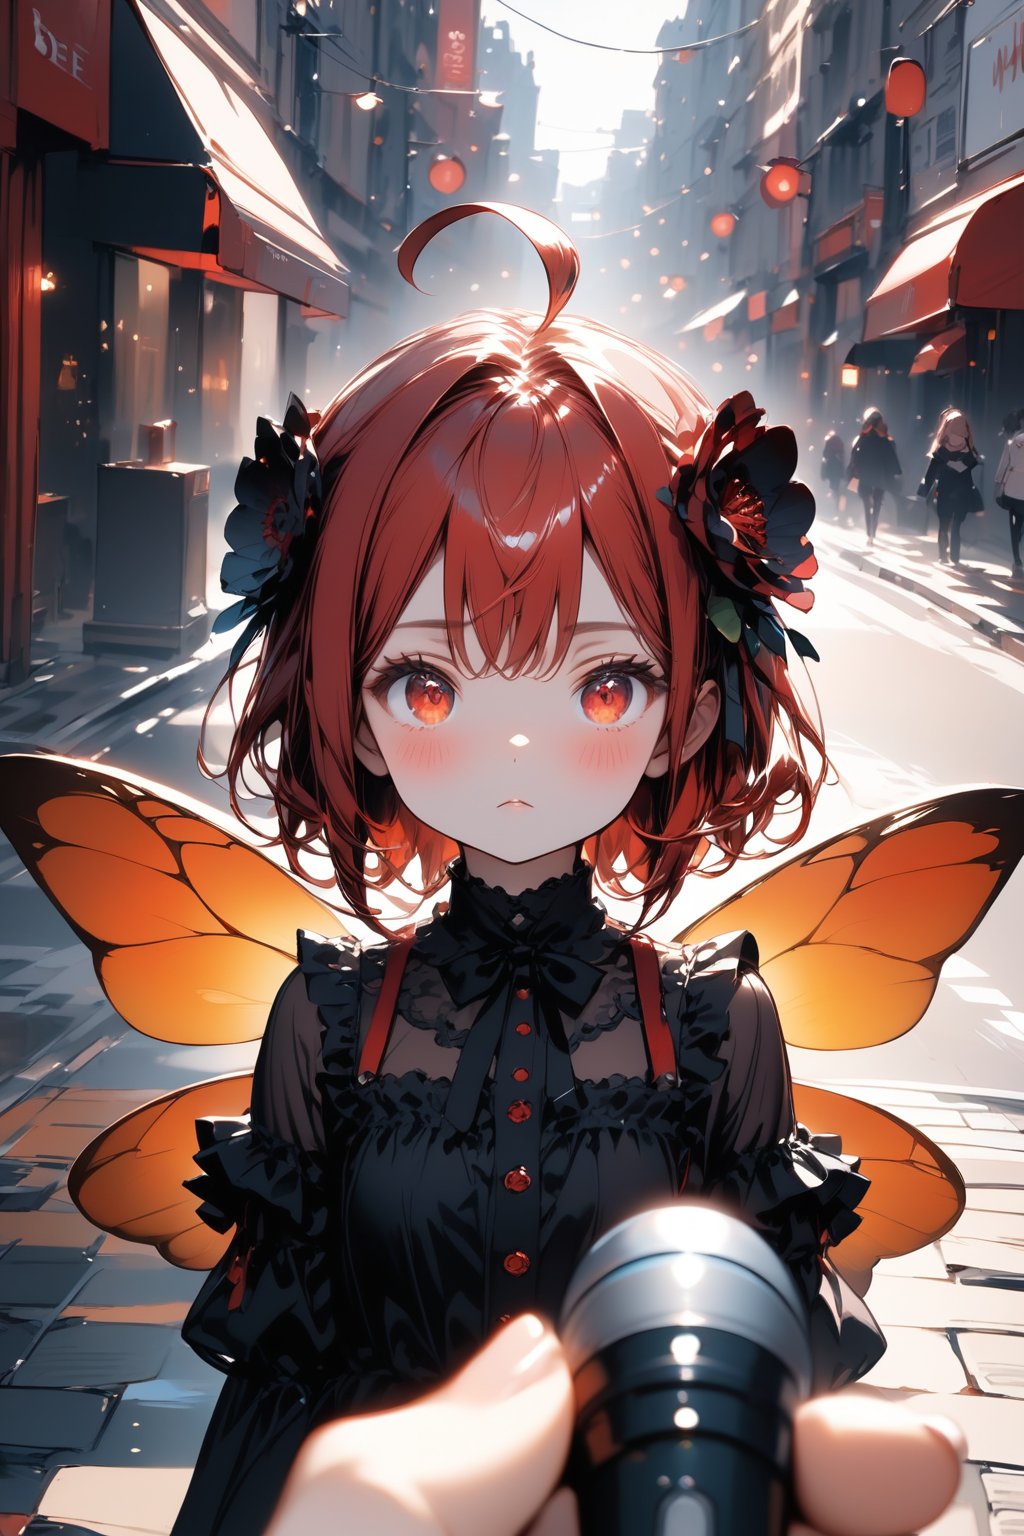 //quality, masterpiece:1.4, detailed:1.4, best quality:1.4,//,1girl,//,(red hair),short hair,ahoge,sidelocks,beautiful detailed eyes,glowing eyes,(red eyes),//,hair_flowers,(bee_wings),black gothic_lolita,//,blush,expressionless,mouth_open,looking_at_viewer,//,standing,//,outdoors,street,Details,Detailed Masterpiece,Deformed,close_up,straight-on,pov,pov microphone,